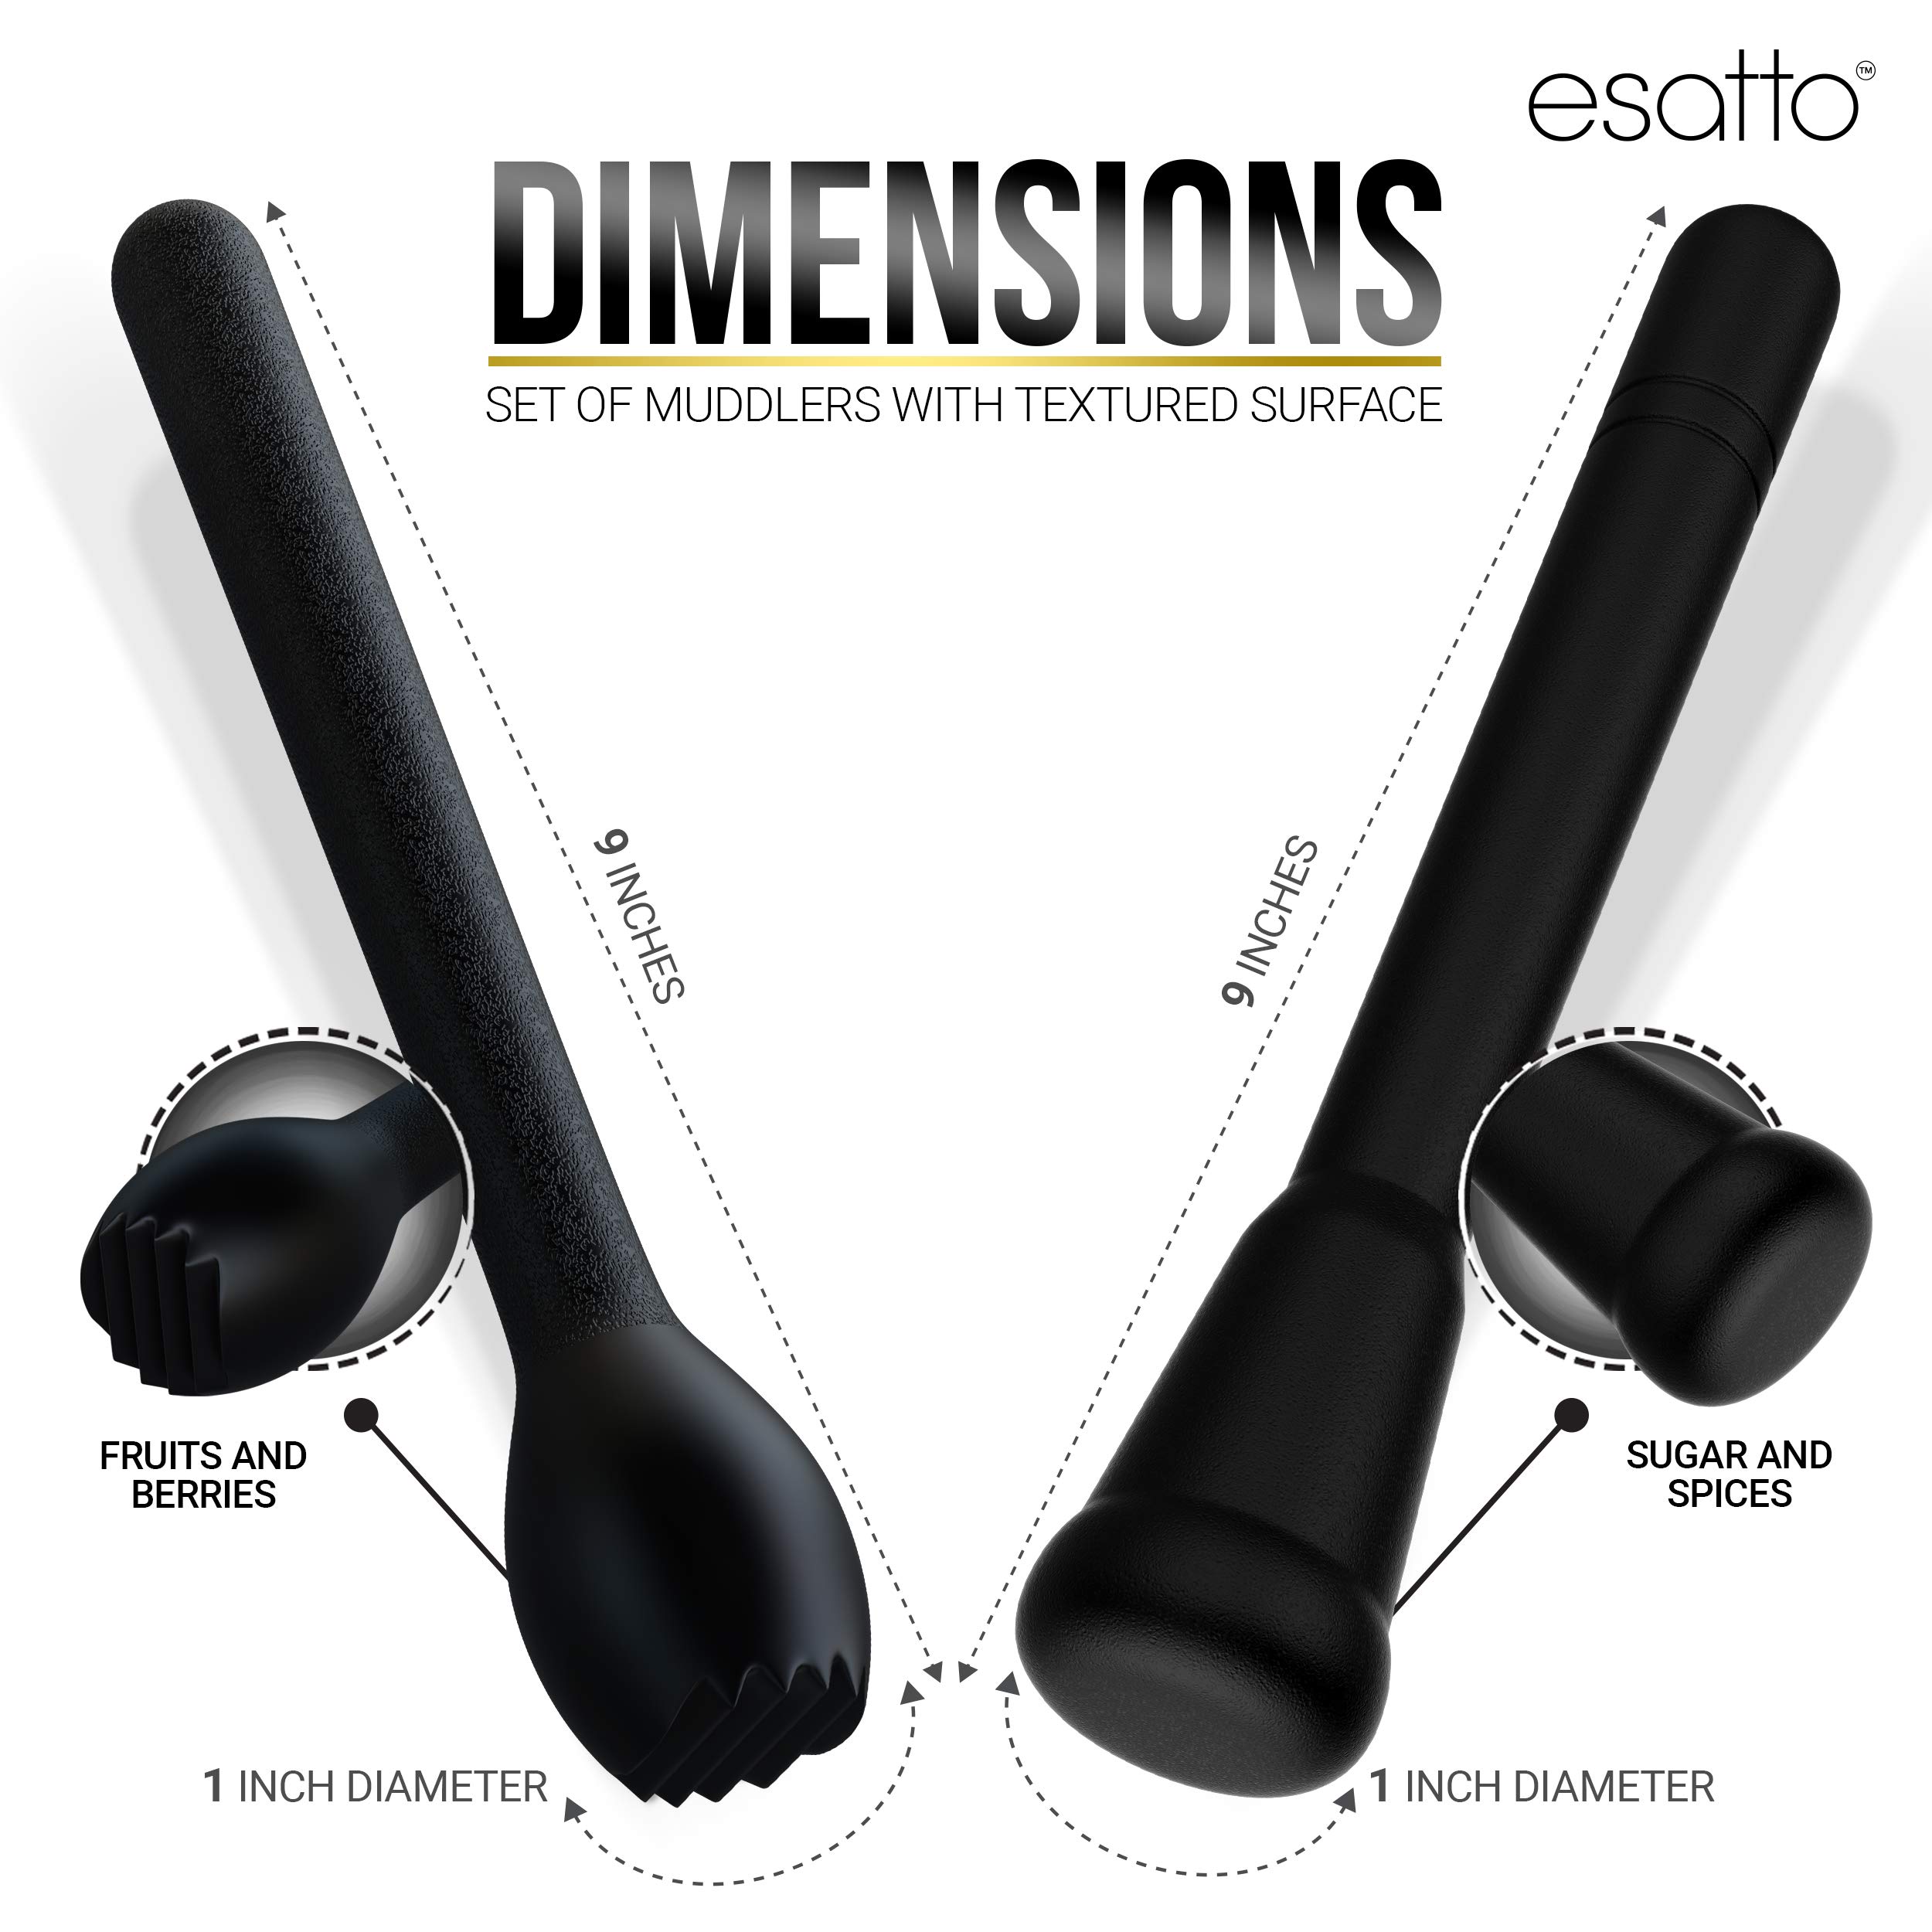 Esatto Professional Bar Tool Muddler 25 CM (9 Inches) Ribbed – Made with ABS Plastic, Black Set of 2 – Durable and Ribbed for Mashing Fruits, Berries, Sugar, Spices, and Herbs